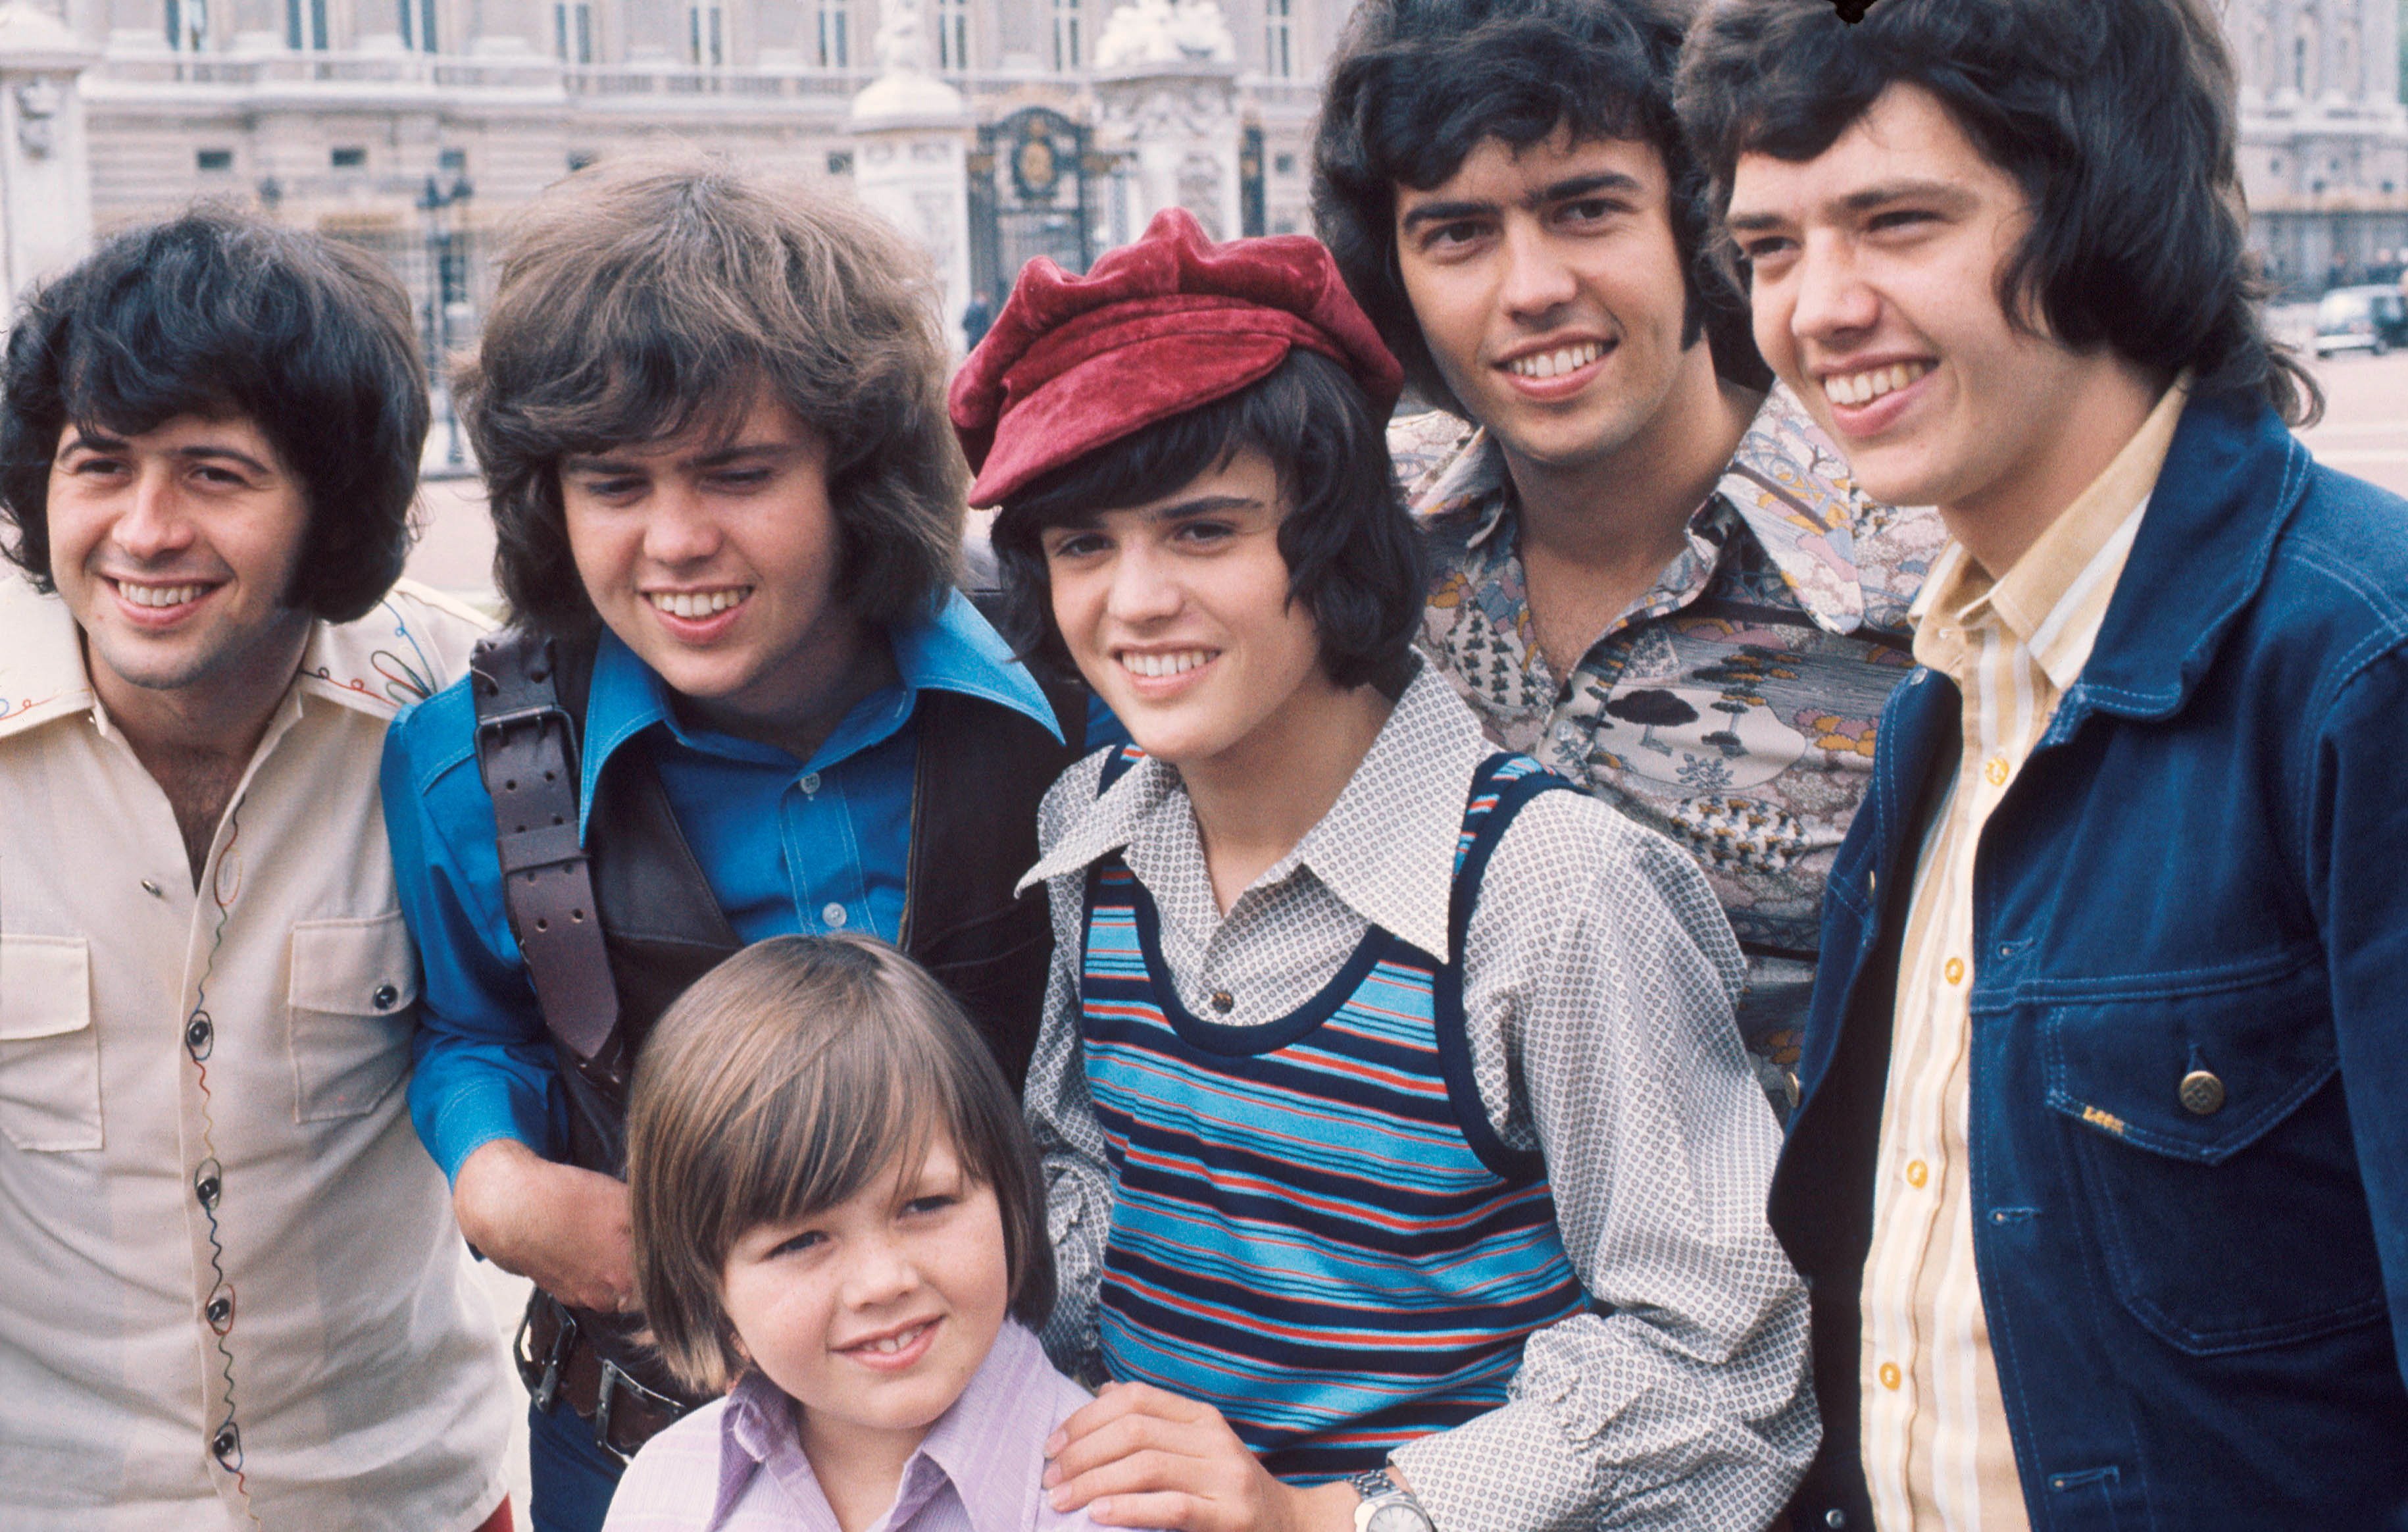 The Osmond Brothers take a group portrait in London in 1973 | Photo: Getty Images